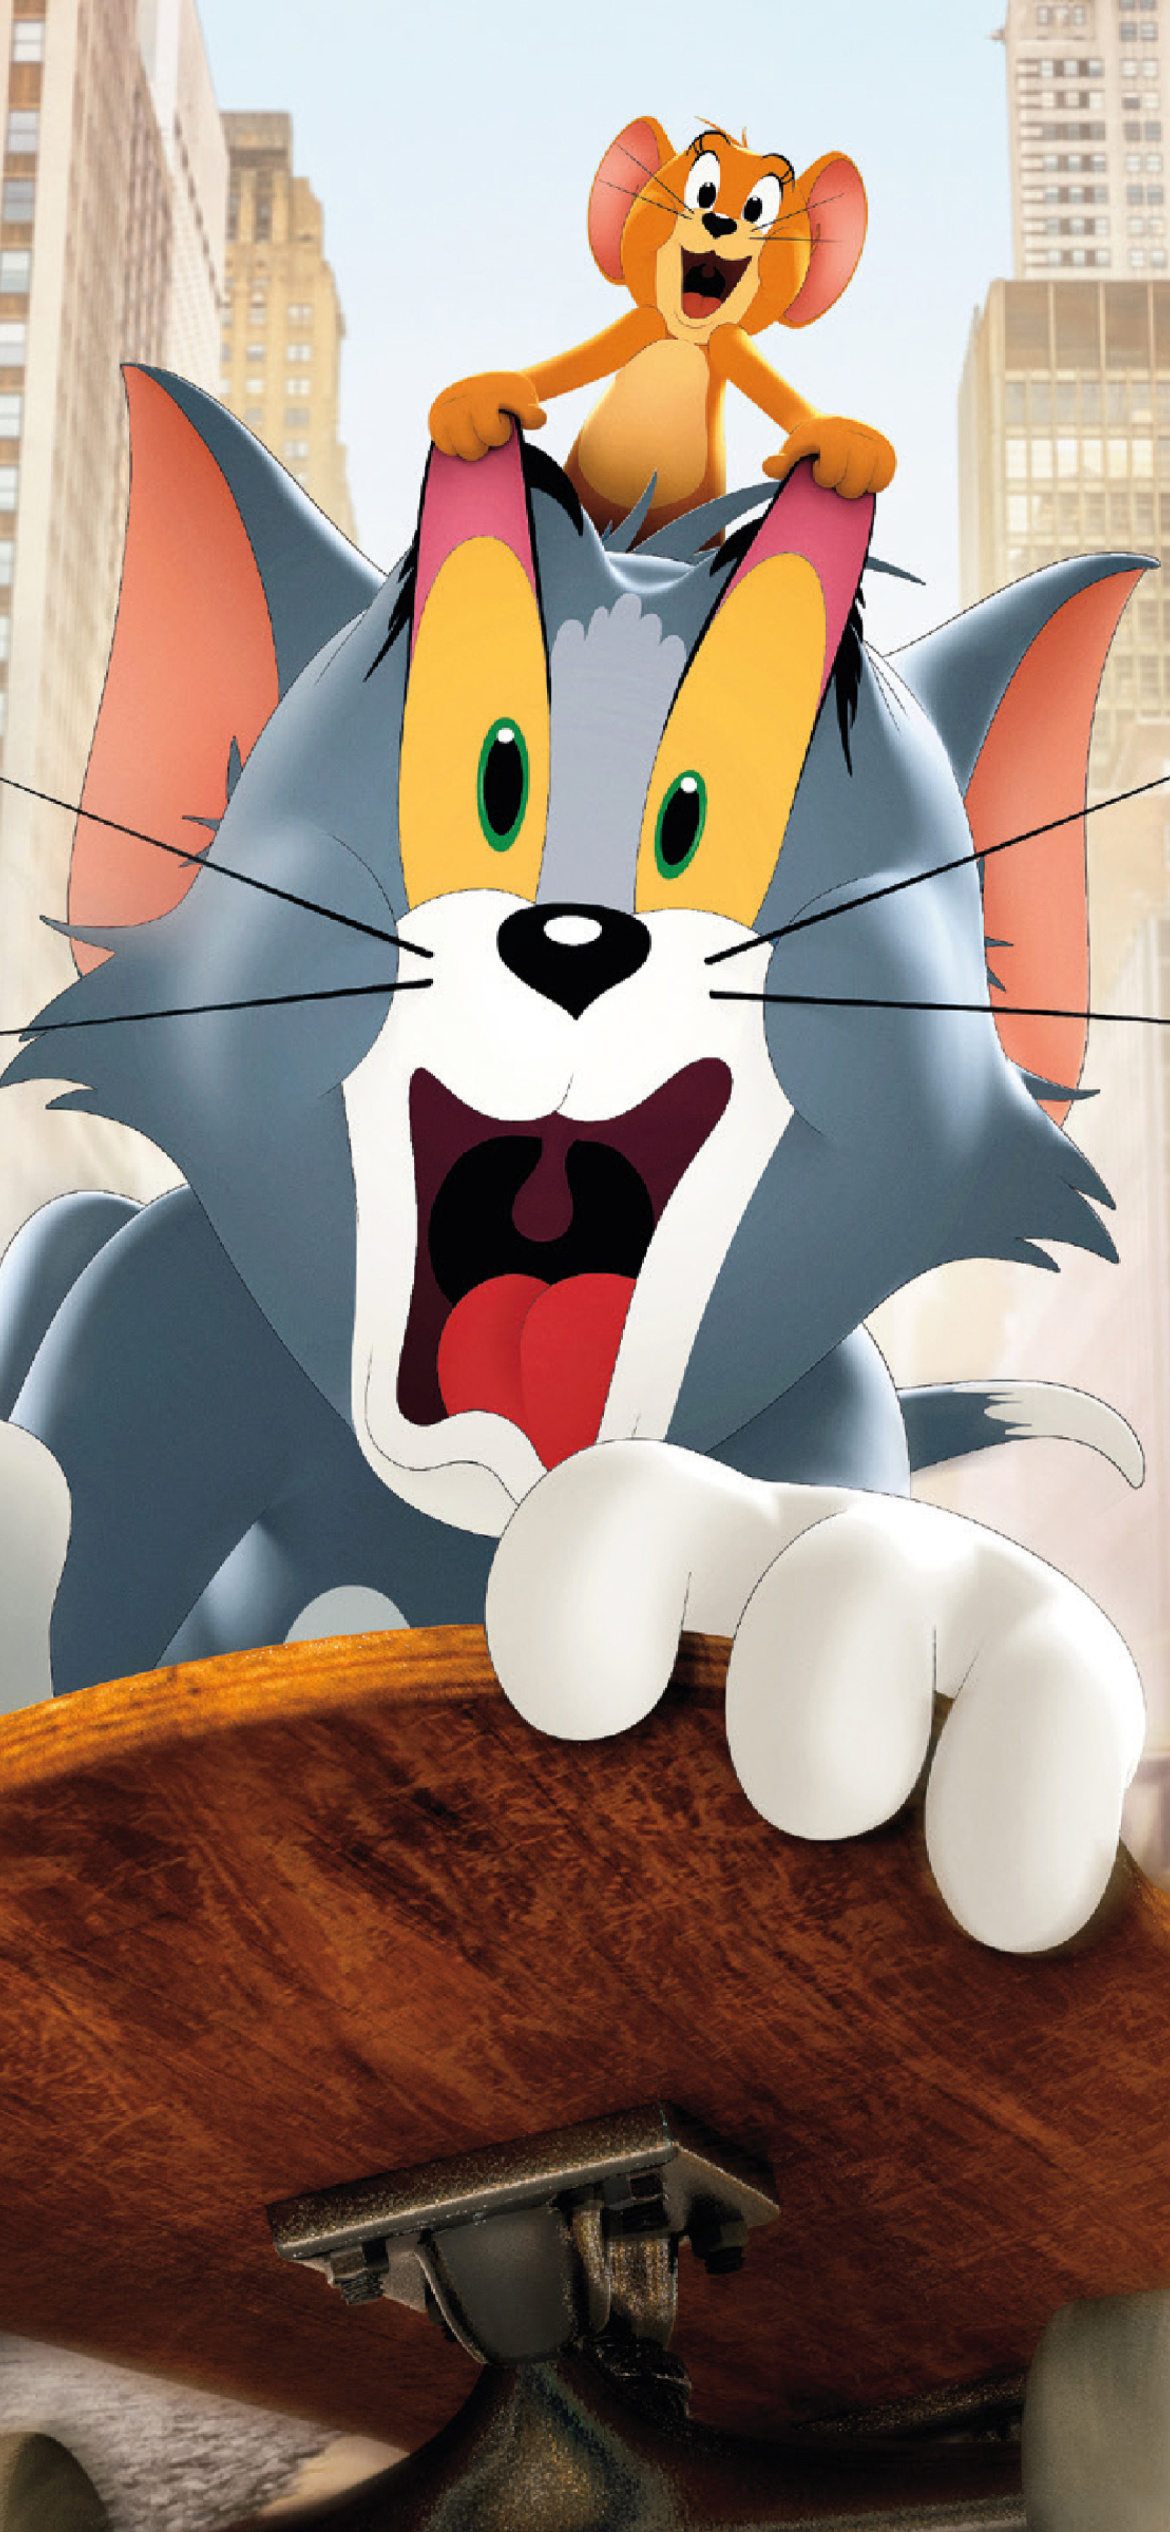 Tom and Jerry Movie Poster wallpaper 1170x2532